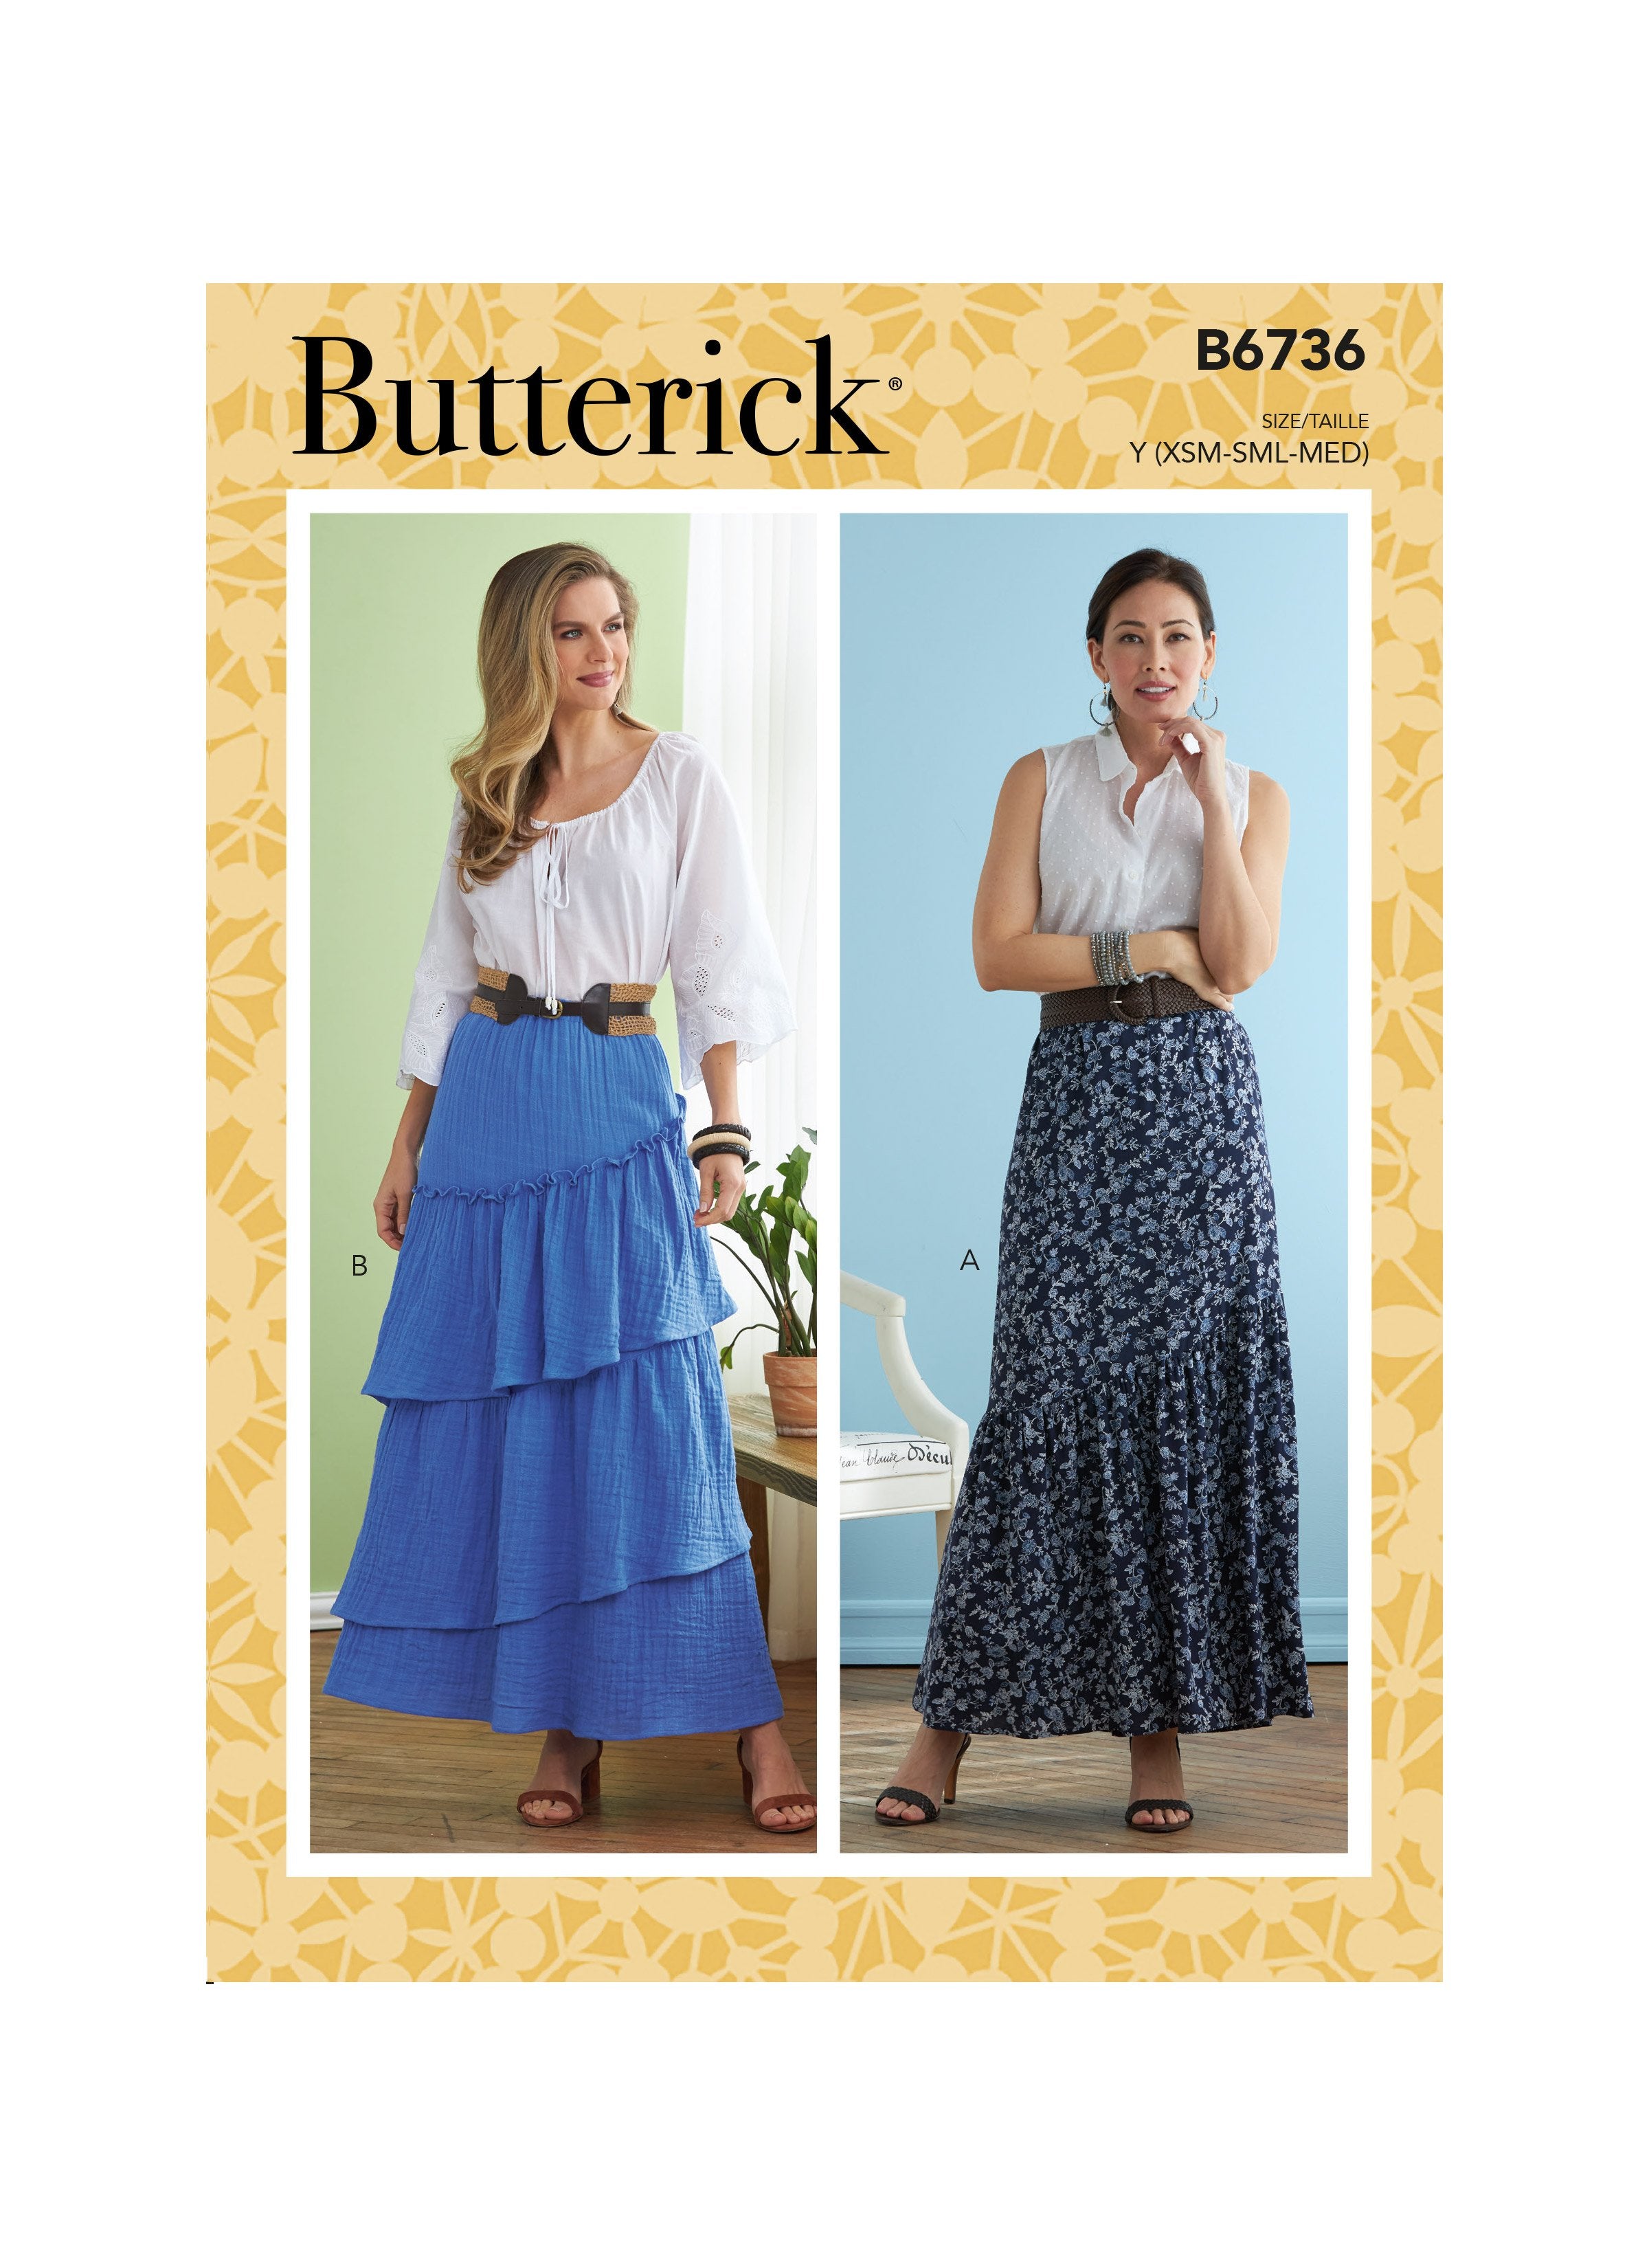 Butterick Sewing Pattern 6736 Misses' Skirts from Jaycotts Sewing Supplies